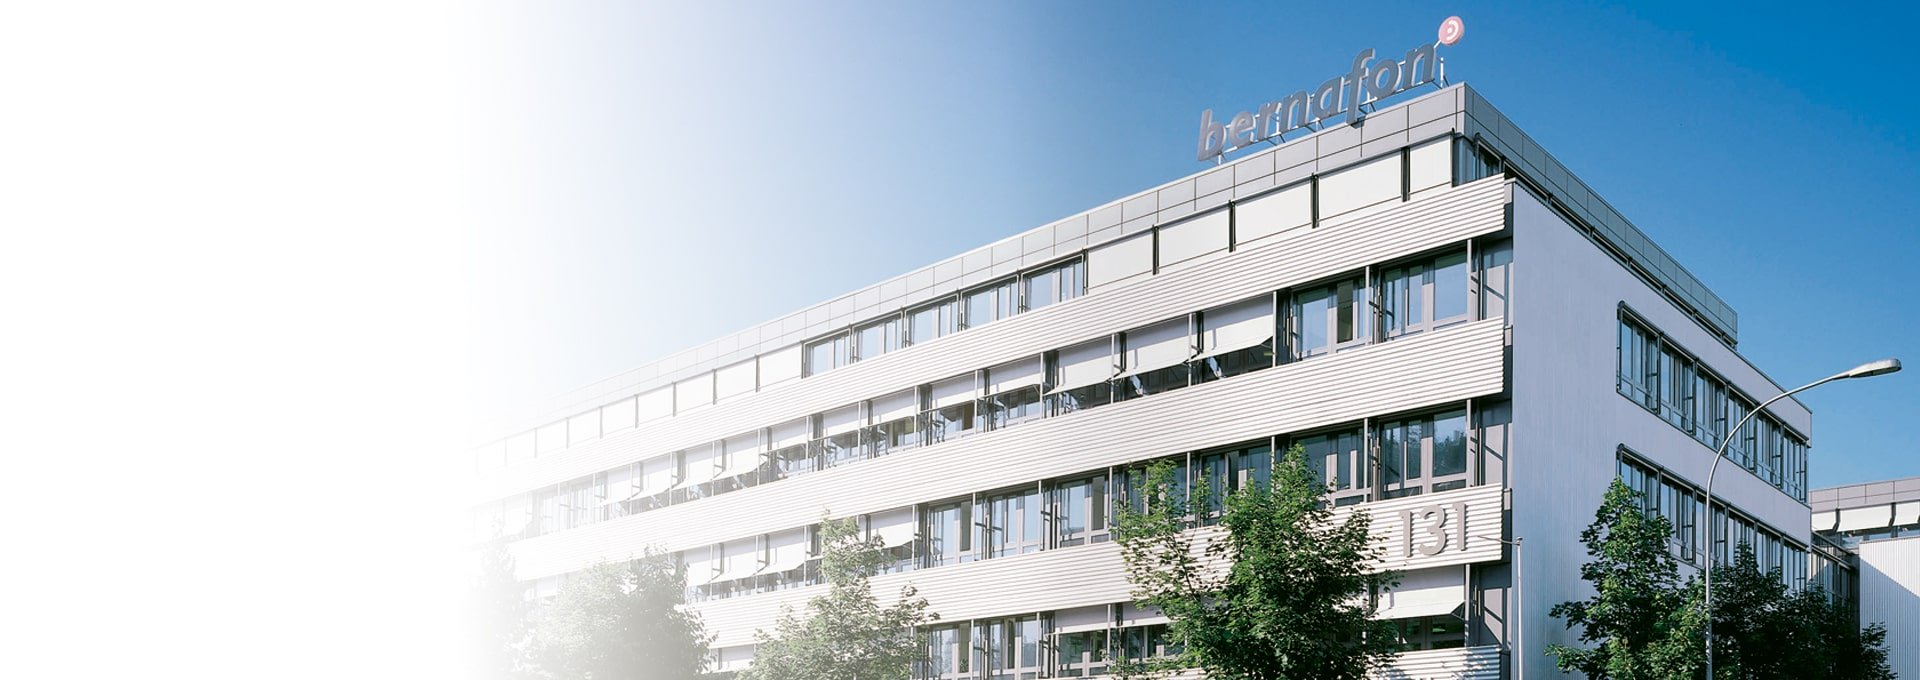 Picture of Bernafon global headquarters building in Bern, Switzerland, on a sunny day